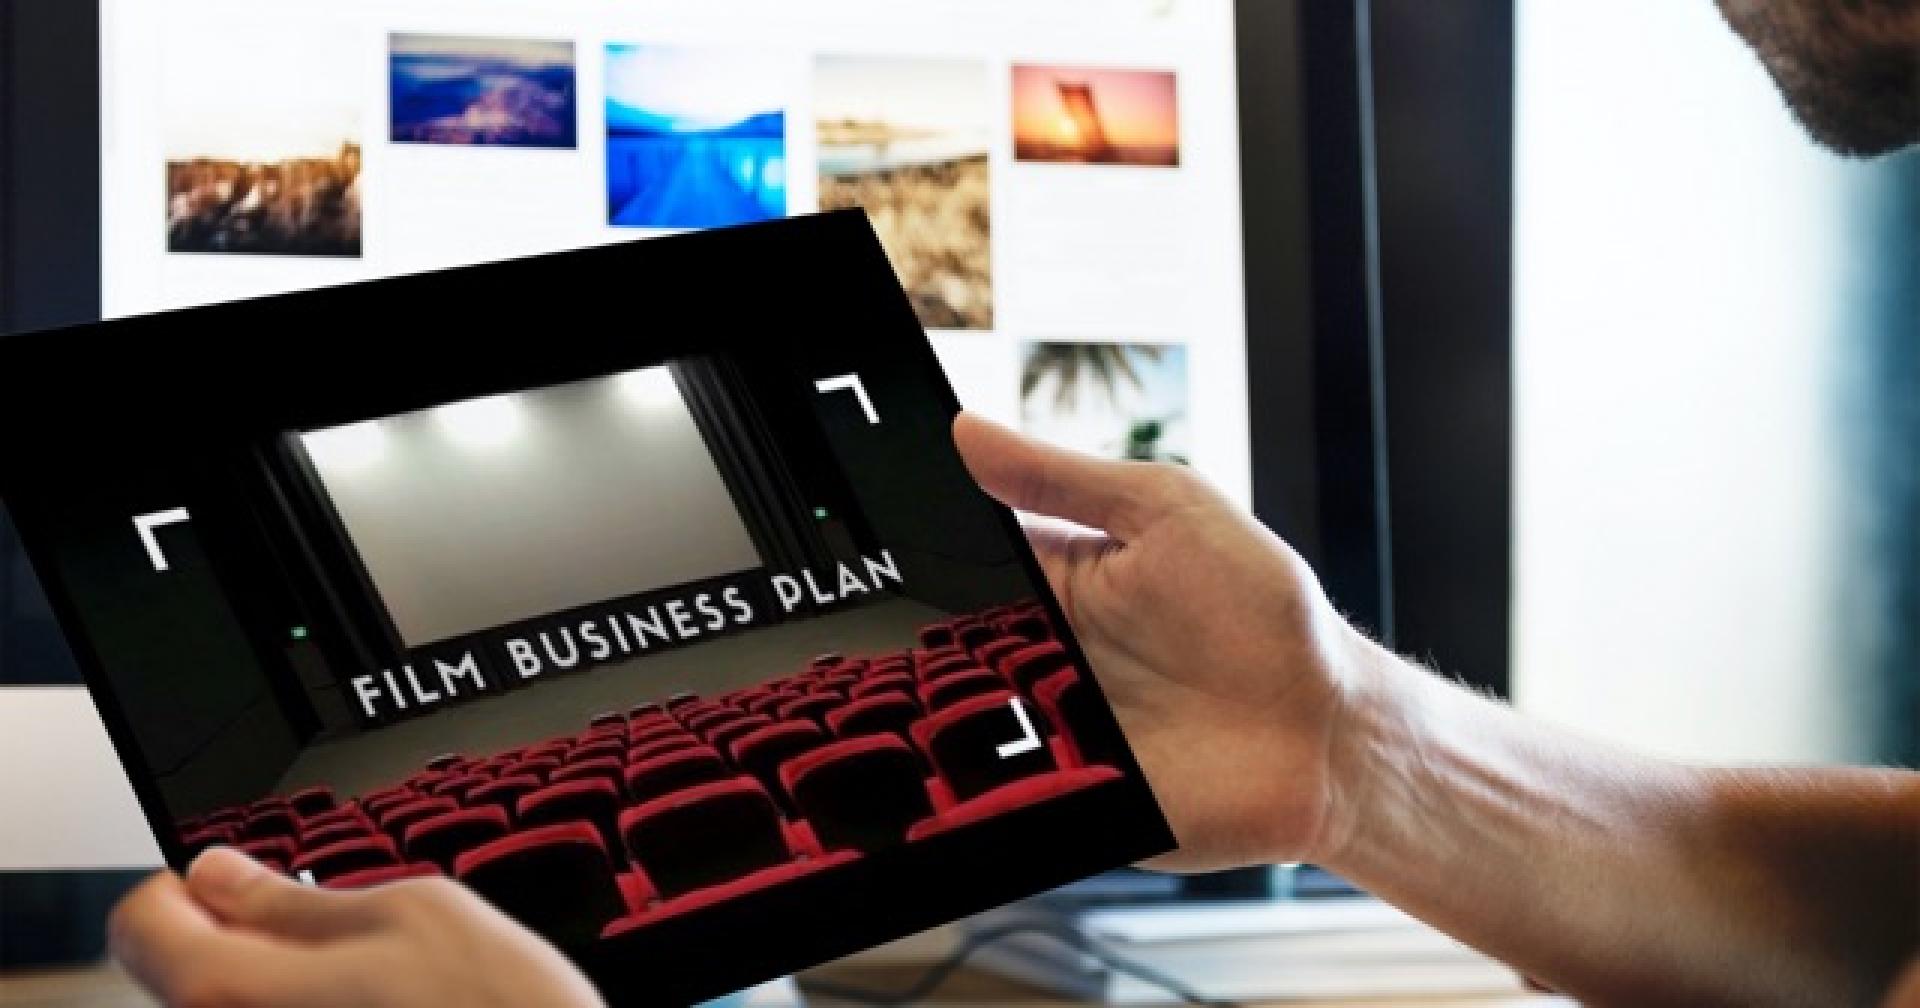 film business plan example